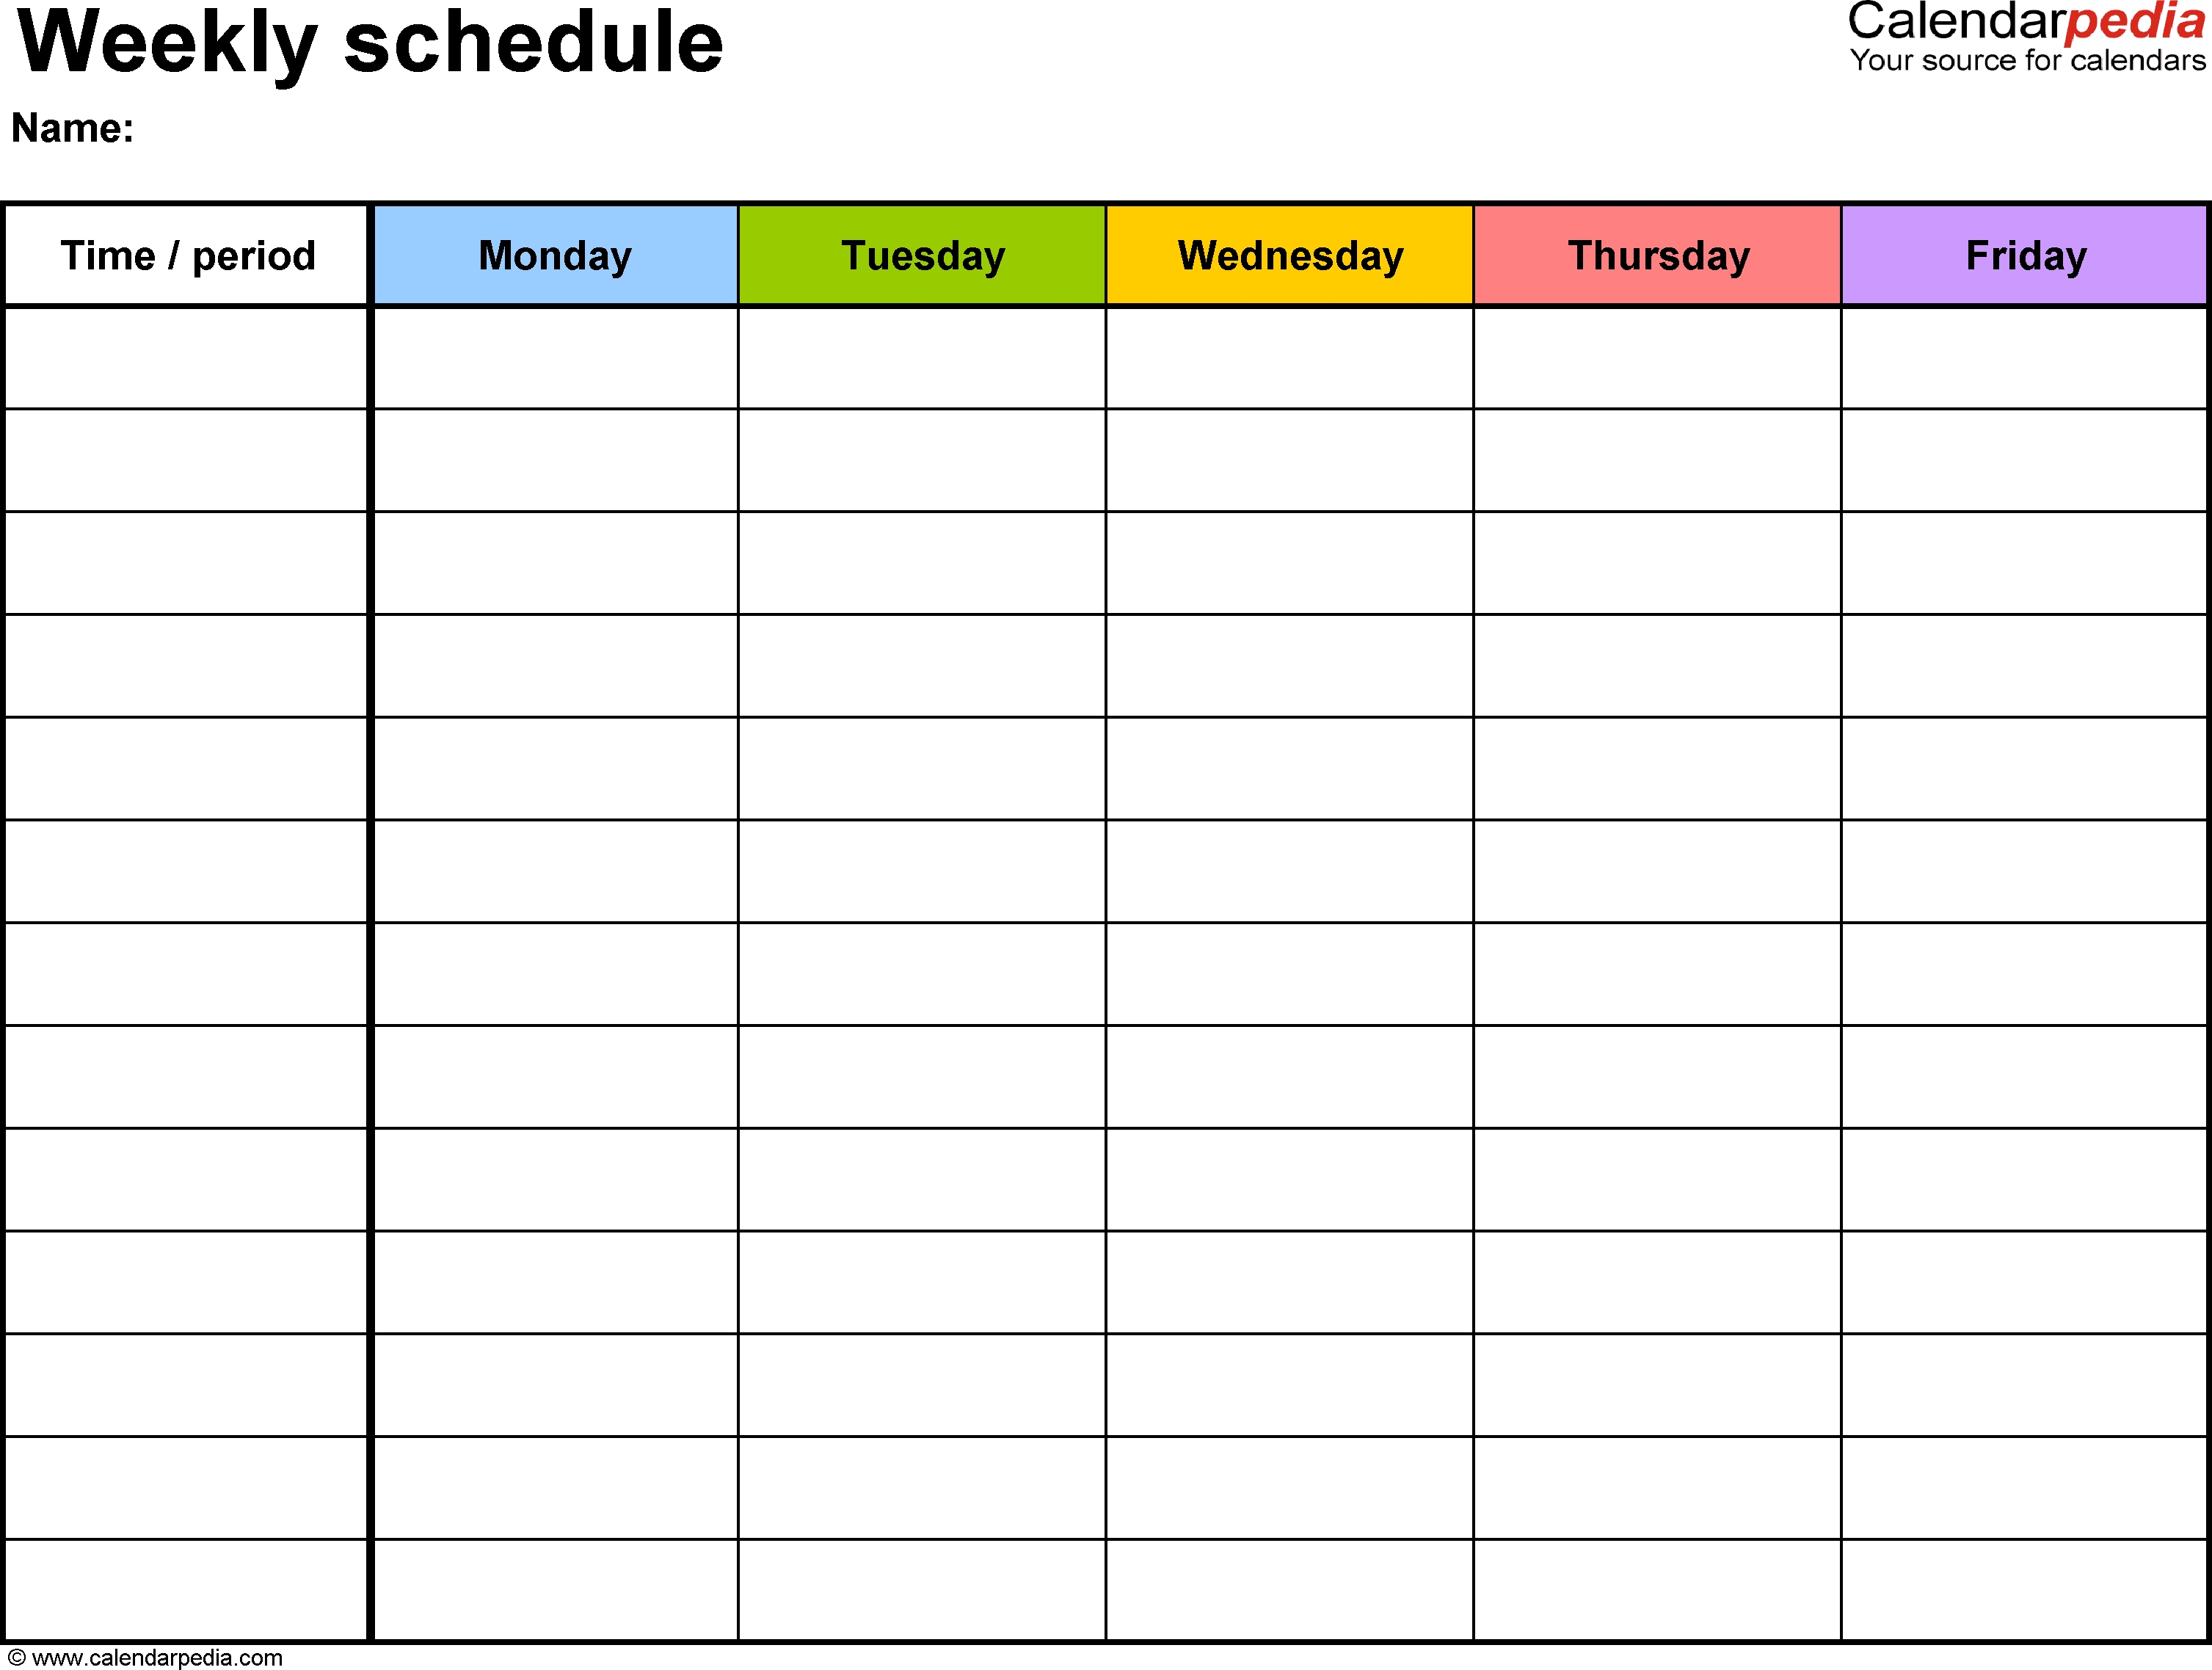 Free Weekly Schedule Templates For Excel - 18 Templates Blank Calendar 5 Weeks